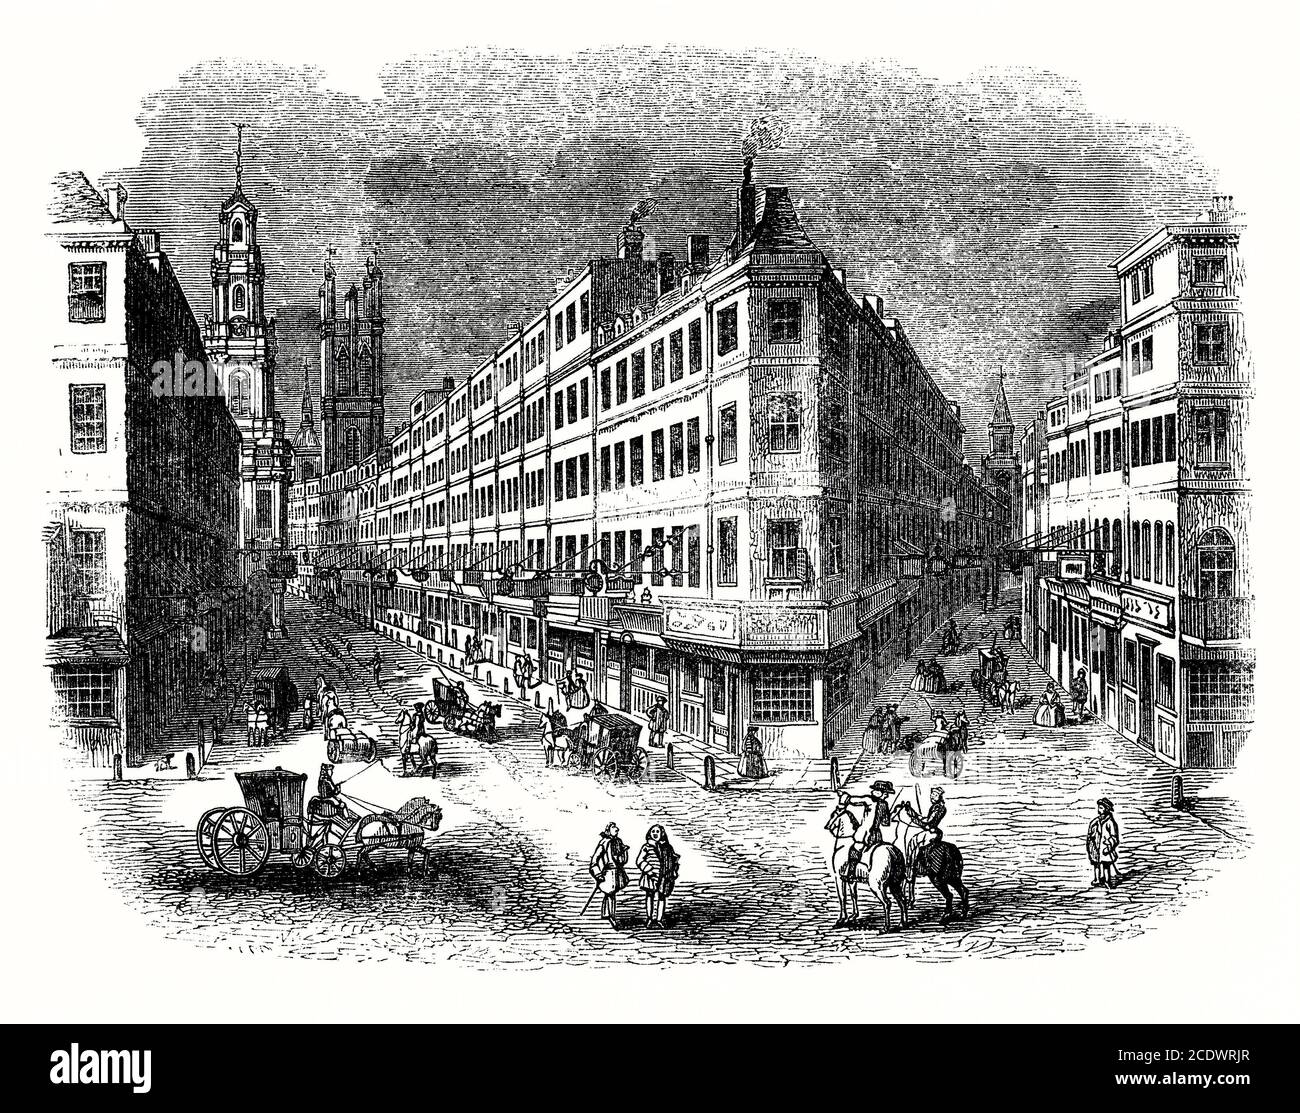 An old engraving of the busy junction of Cornhill (left) and Lombard Street with the tower of the Royal Exchange in the distance (left), City of London, England, UK c.1750. The Royal Exchange in London was founded in the 16th century by the merchant Sir Thomas Gresham on the suggestion of his factor Richard Clough to act as a centre of commerce for the City of London. The site was provided by the City of London Corporation and the Worshipful Company of Mercers. Stock Photo